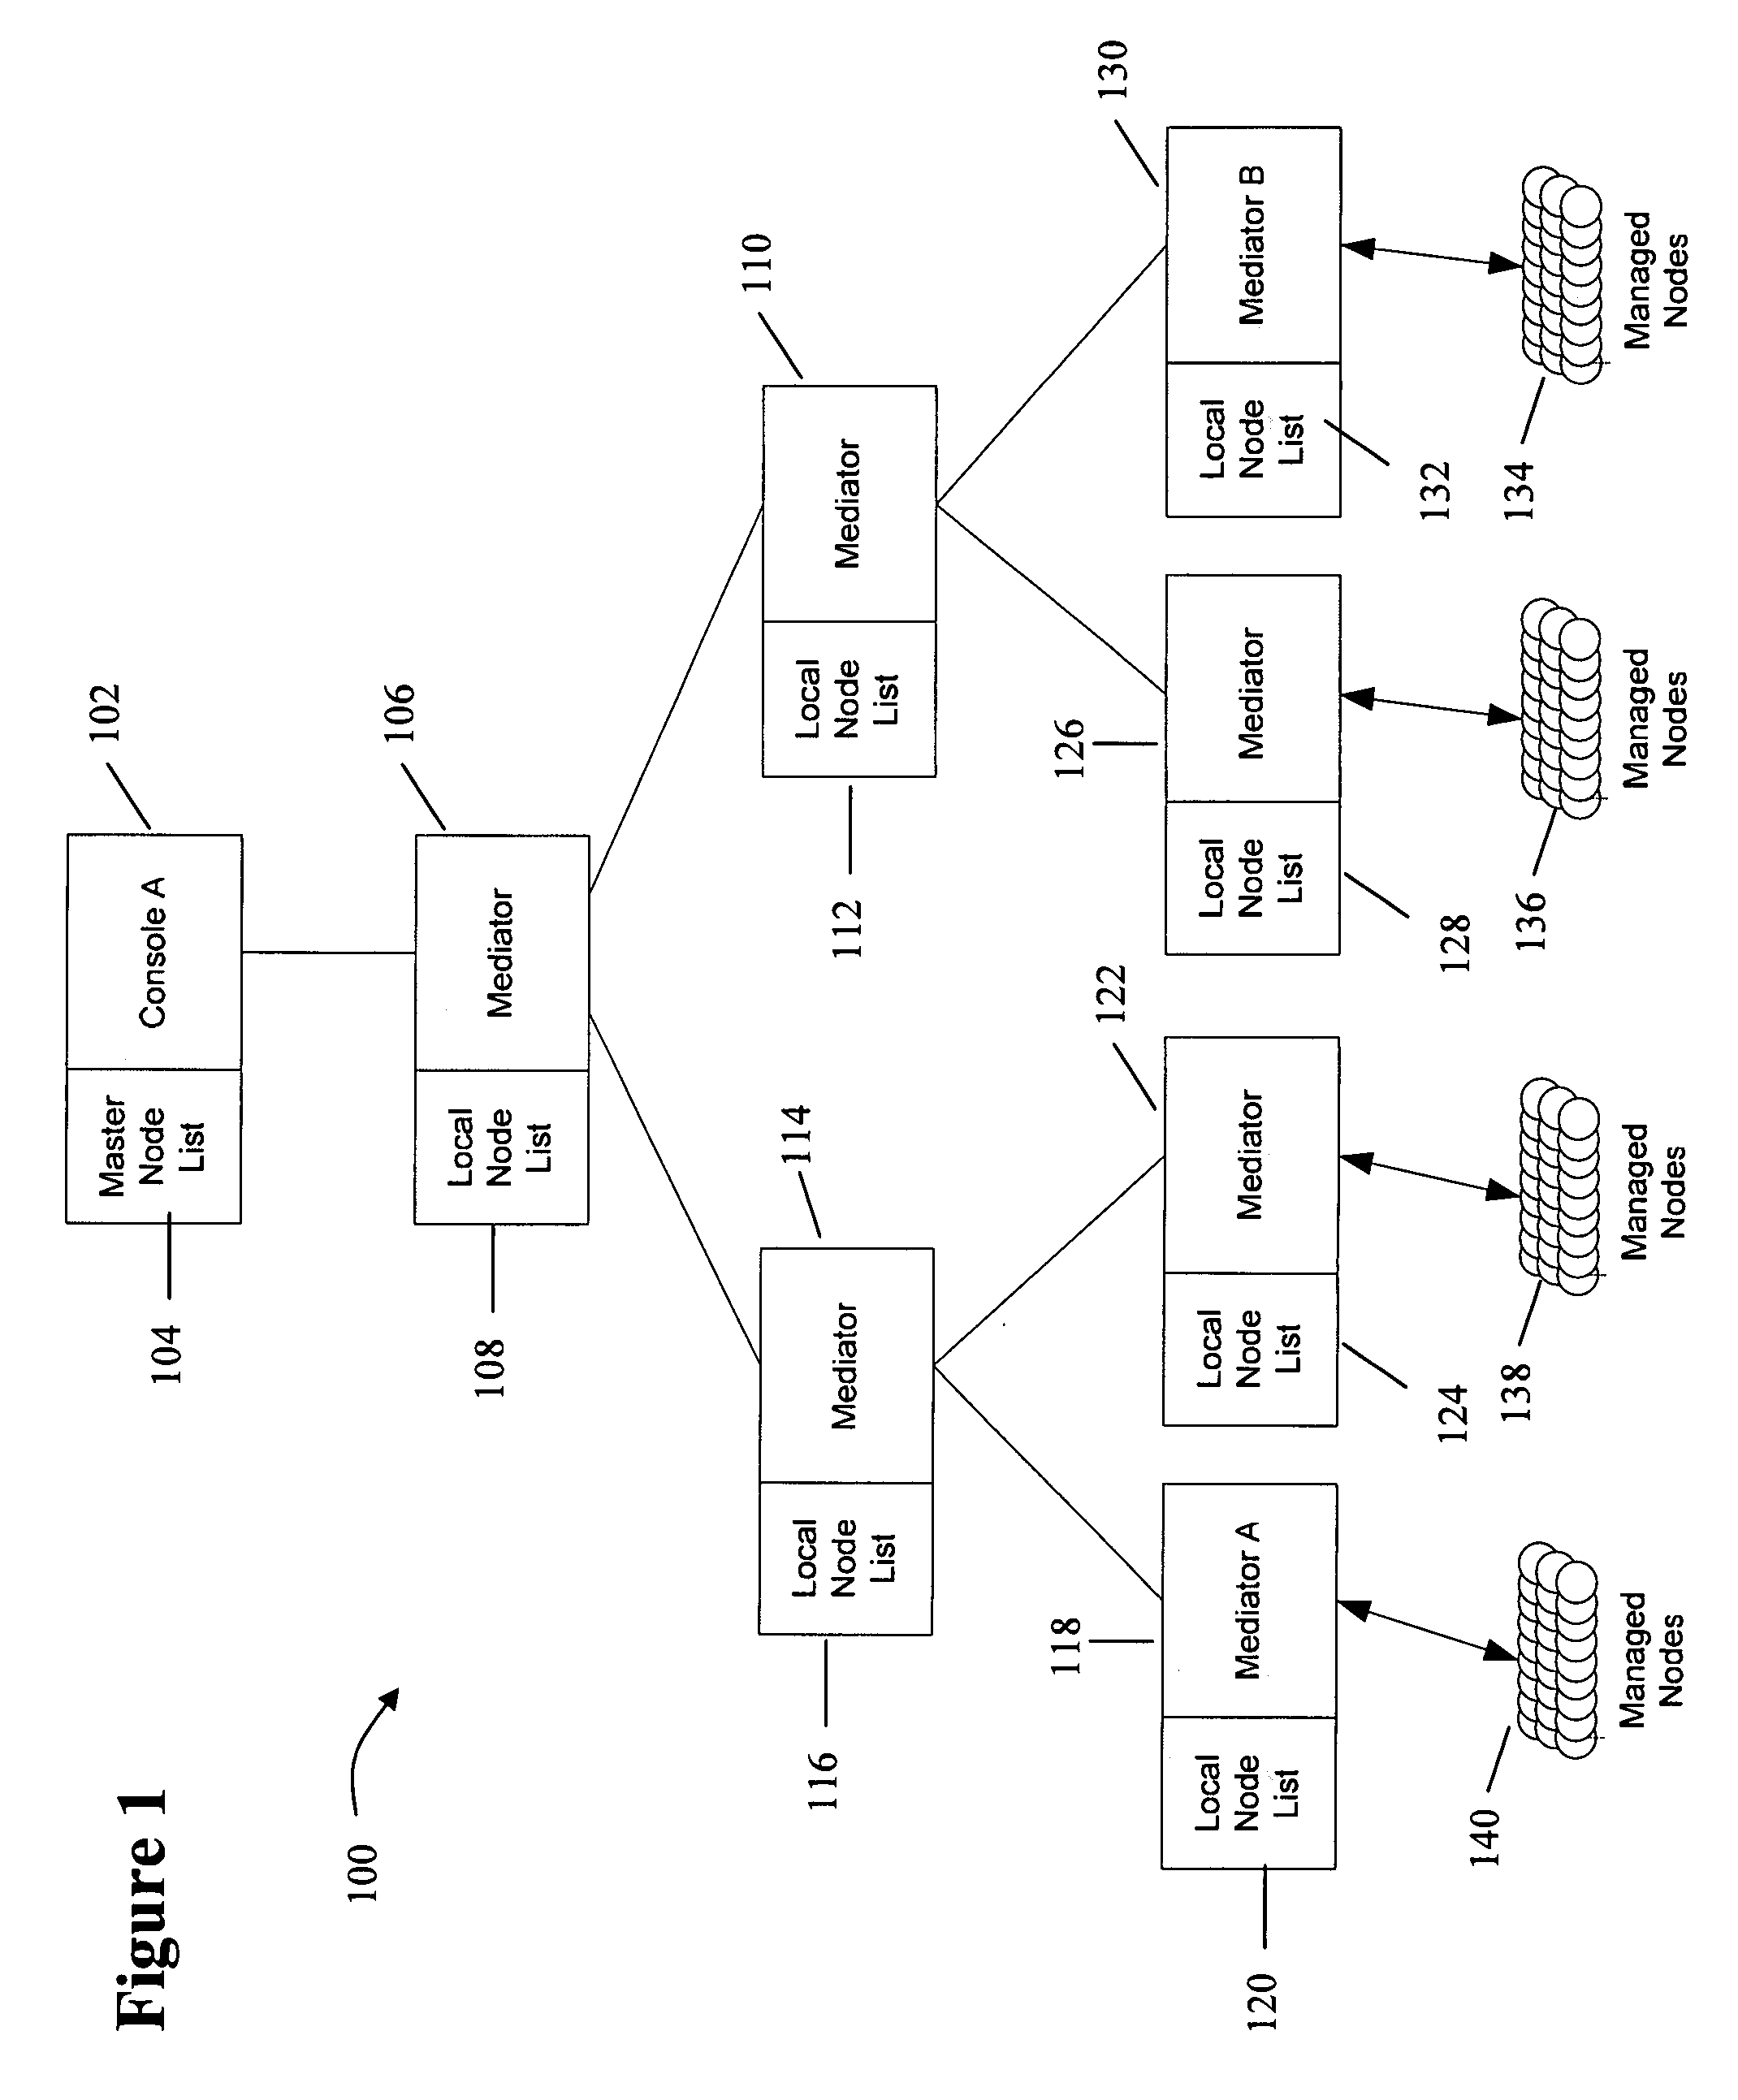 System and method for optimized targeting in a large scale system